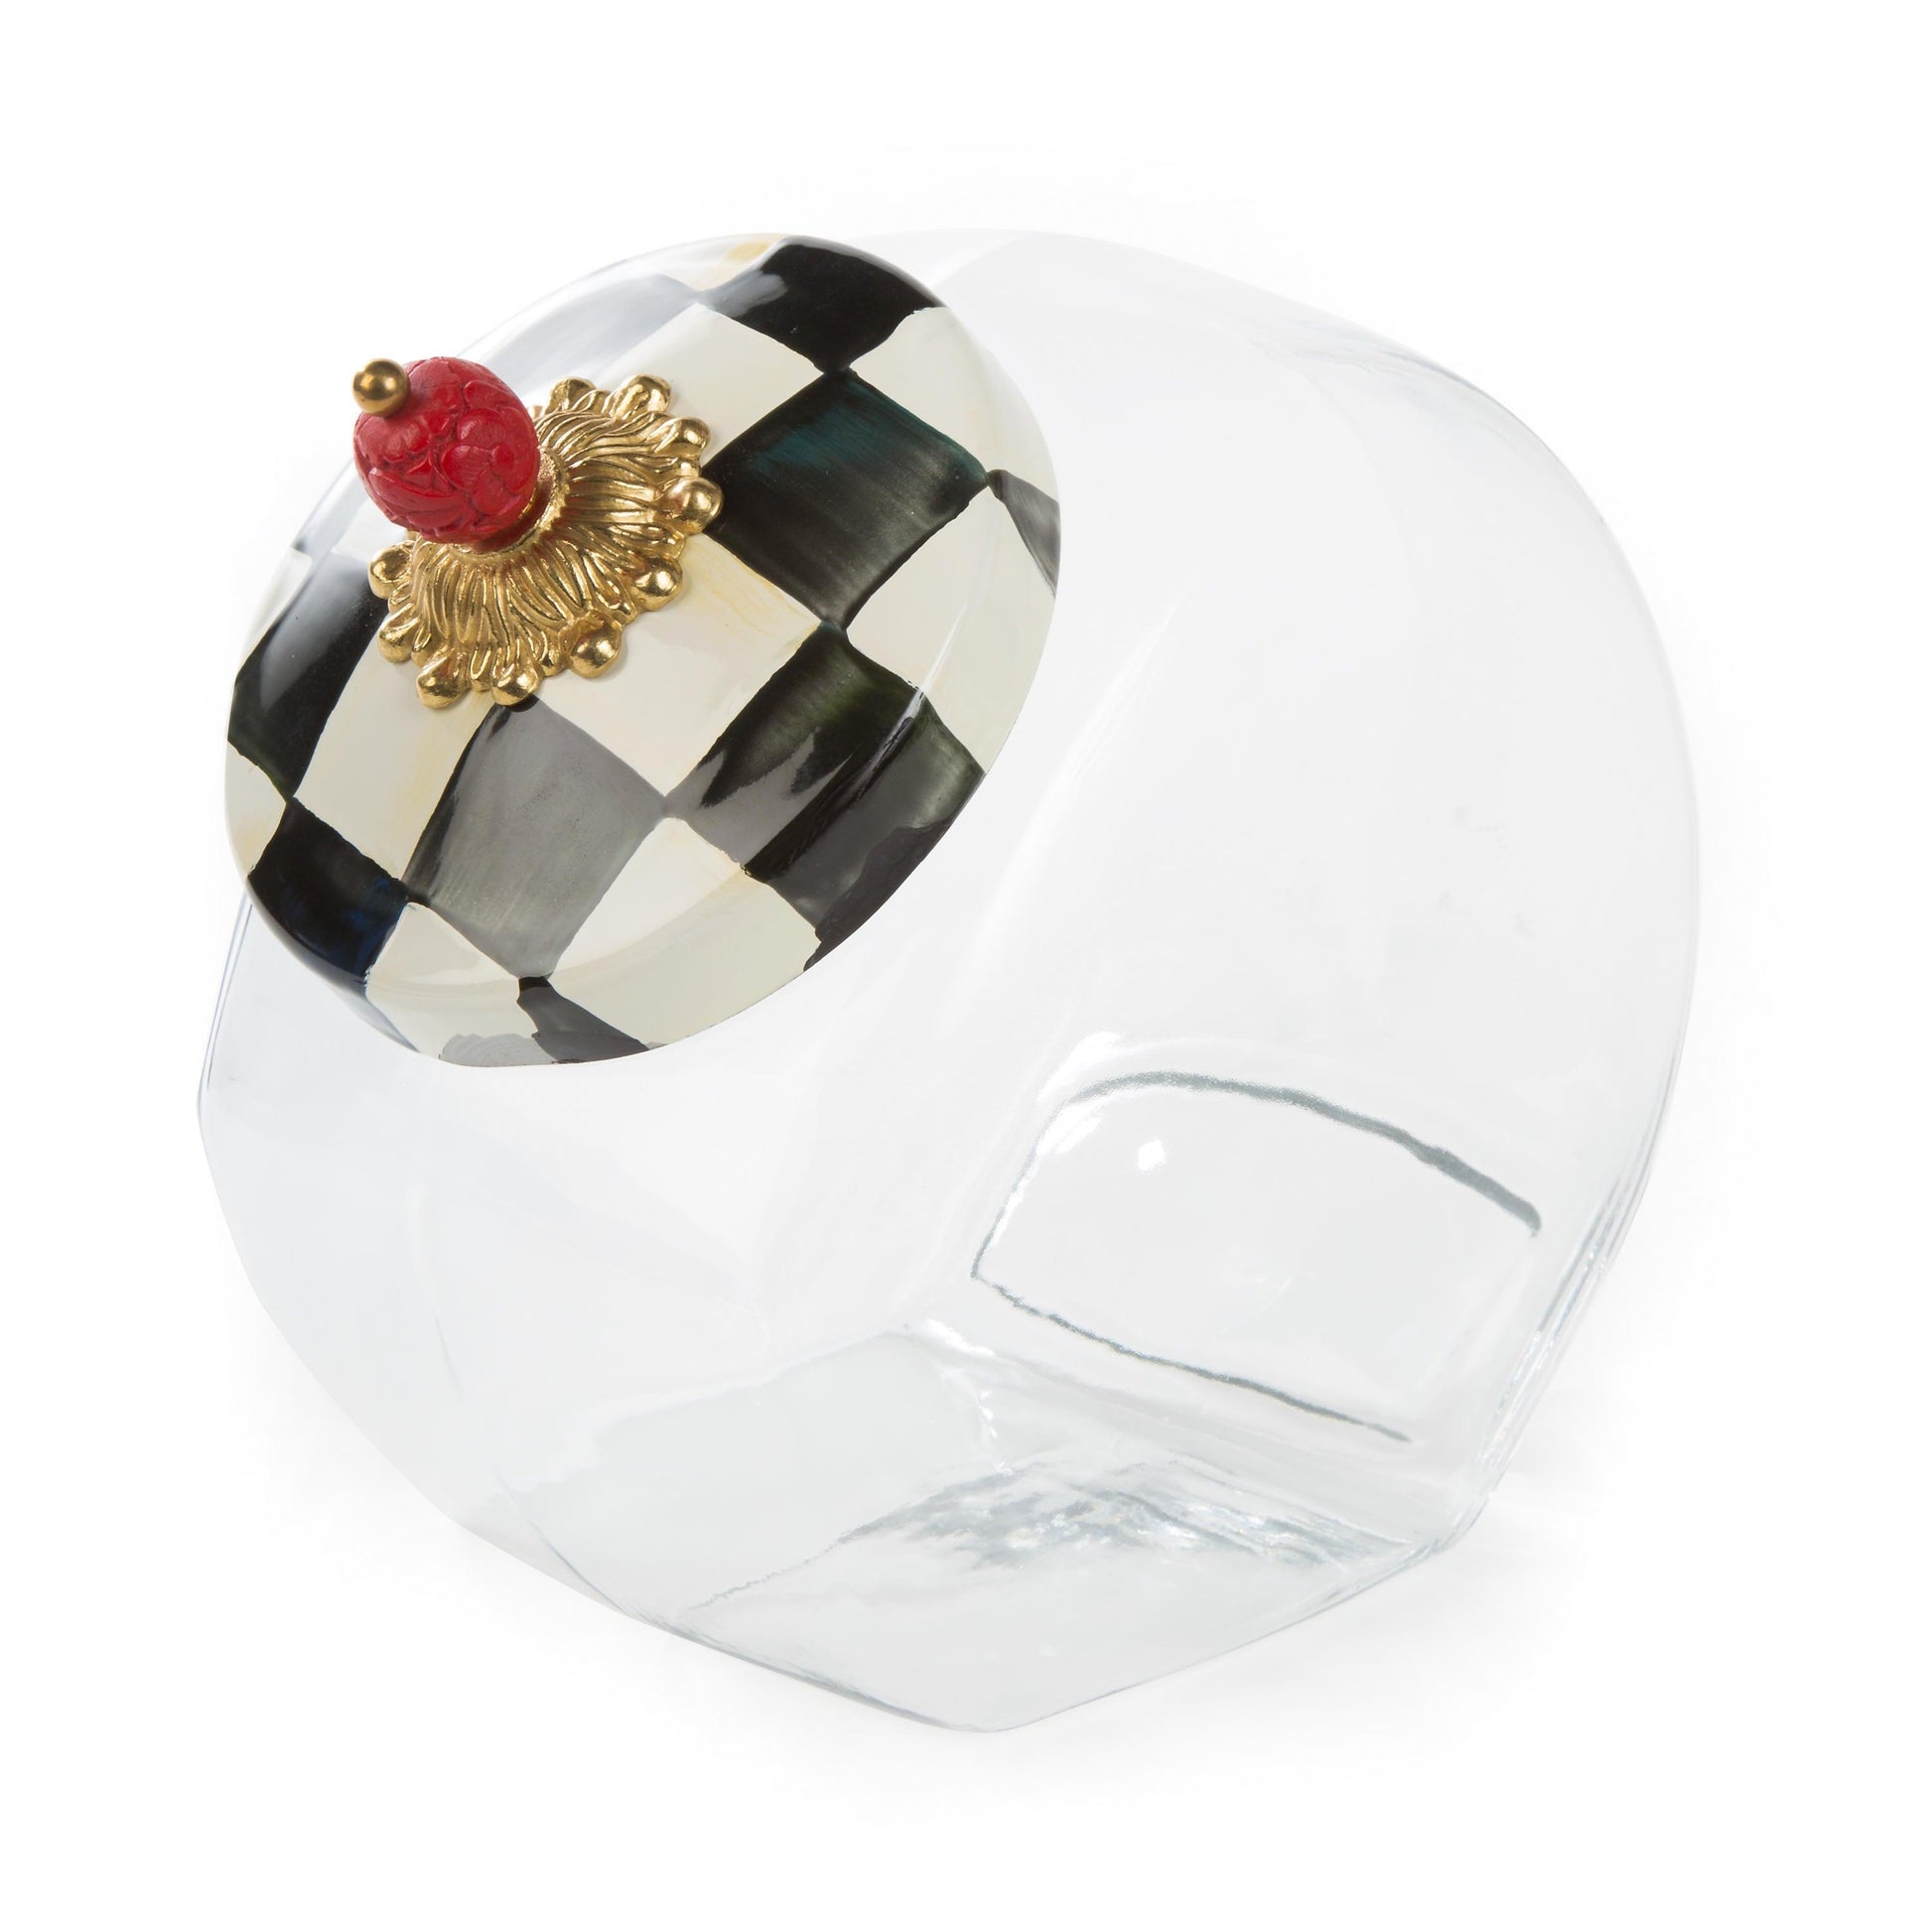 Cookie Jar With Courtly Check Enamel Lid (Mackenzie Childs) - Gallery Gifts Online 